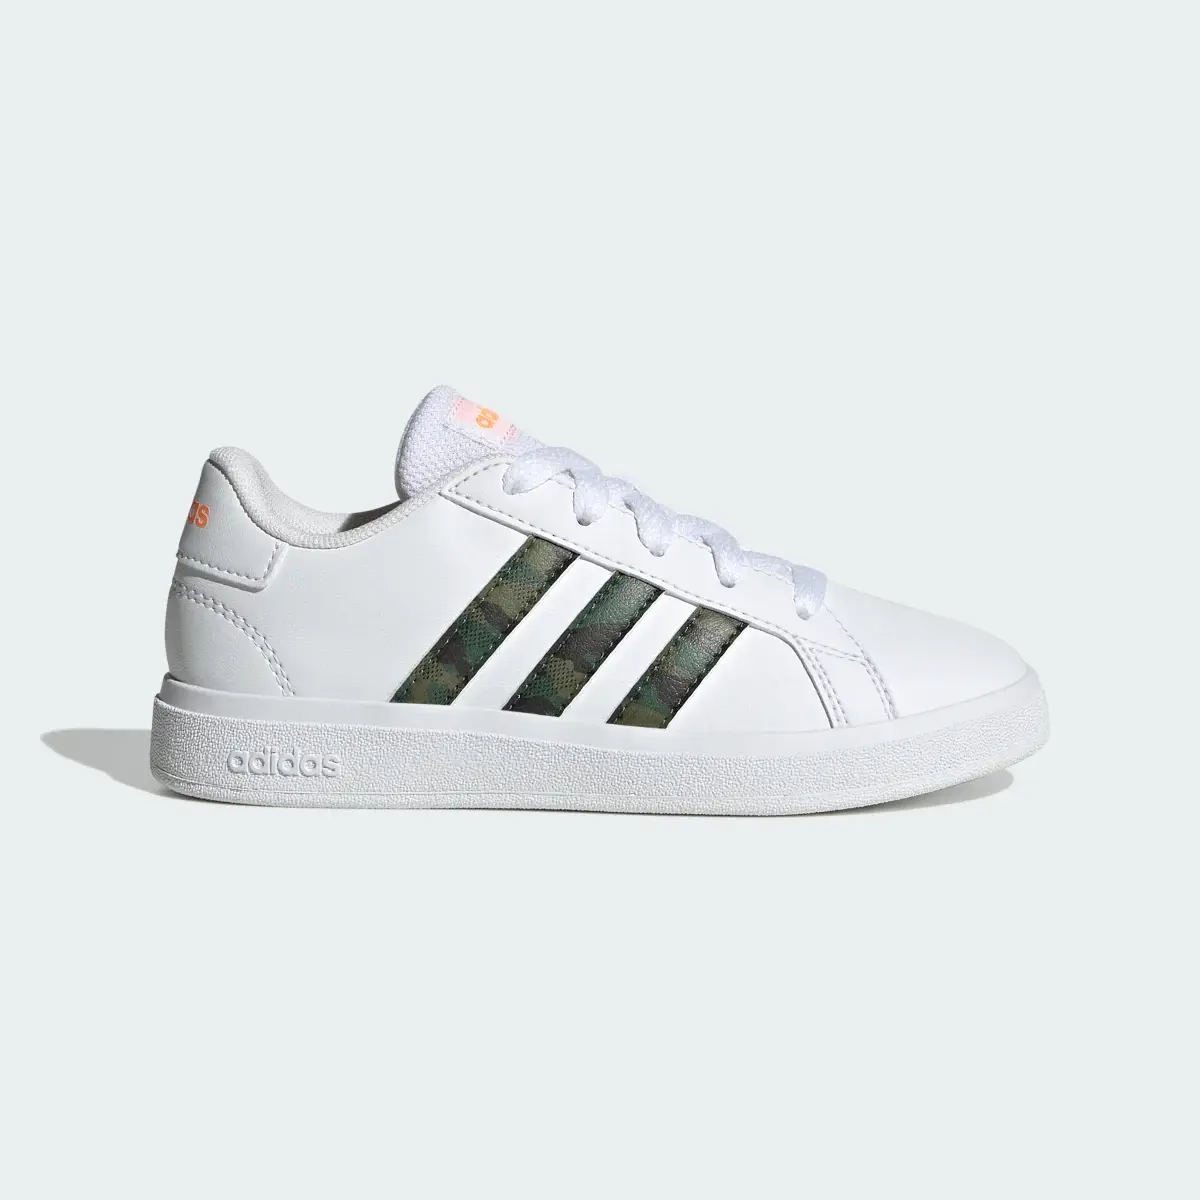 Adidas Grand Court Lifestyle Lace Tennis Shoes. 2